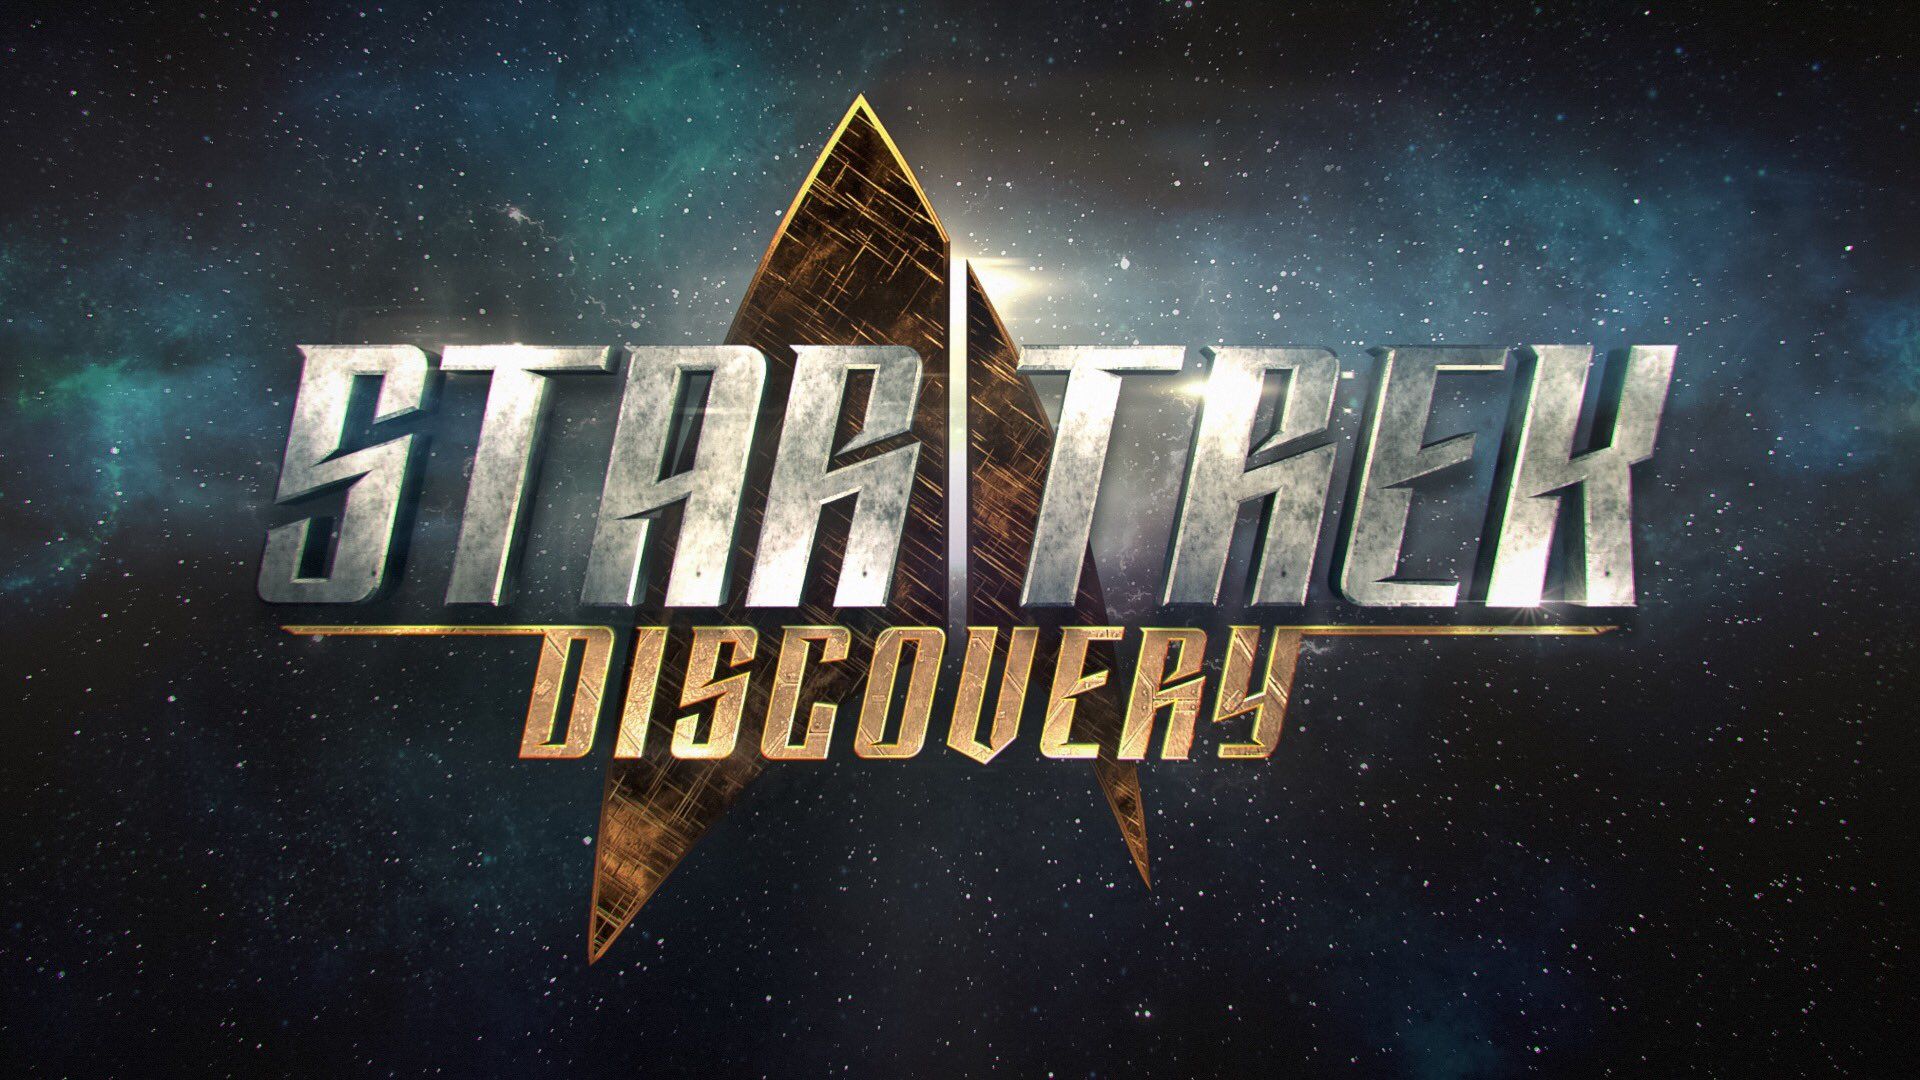 Analysis of the Star Trek USS Discovery (NCC-1031) series teaser